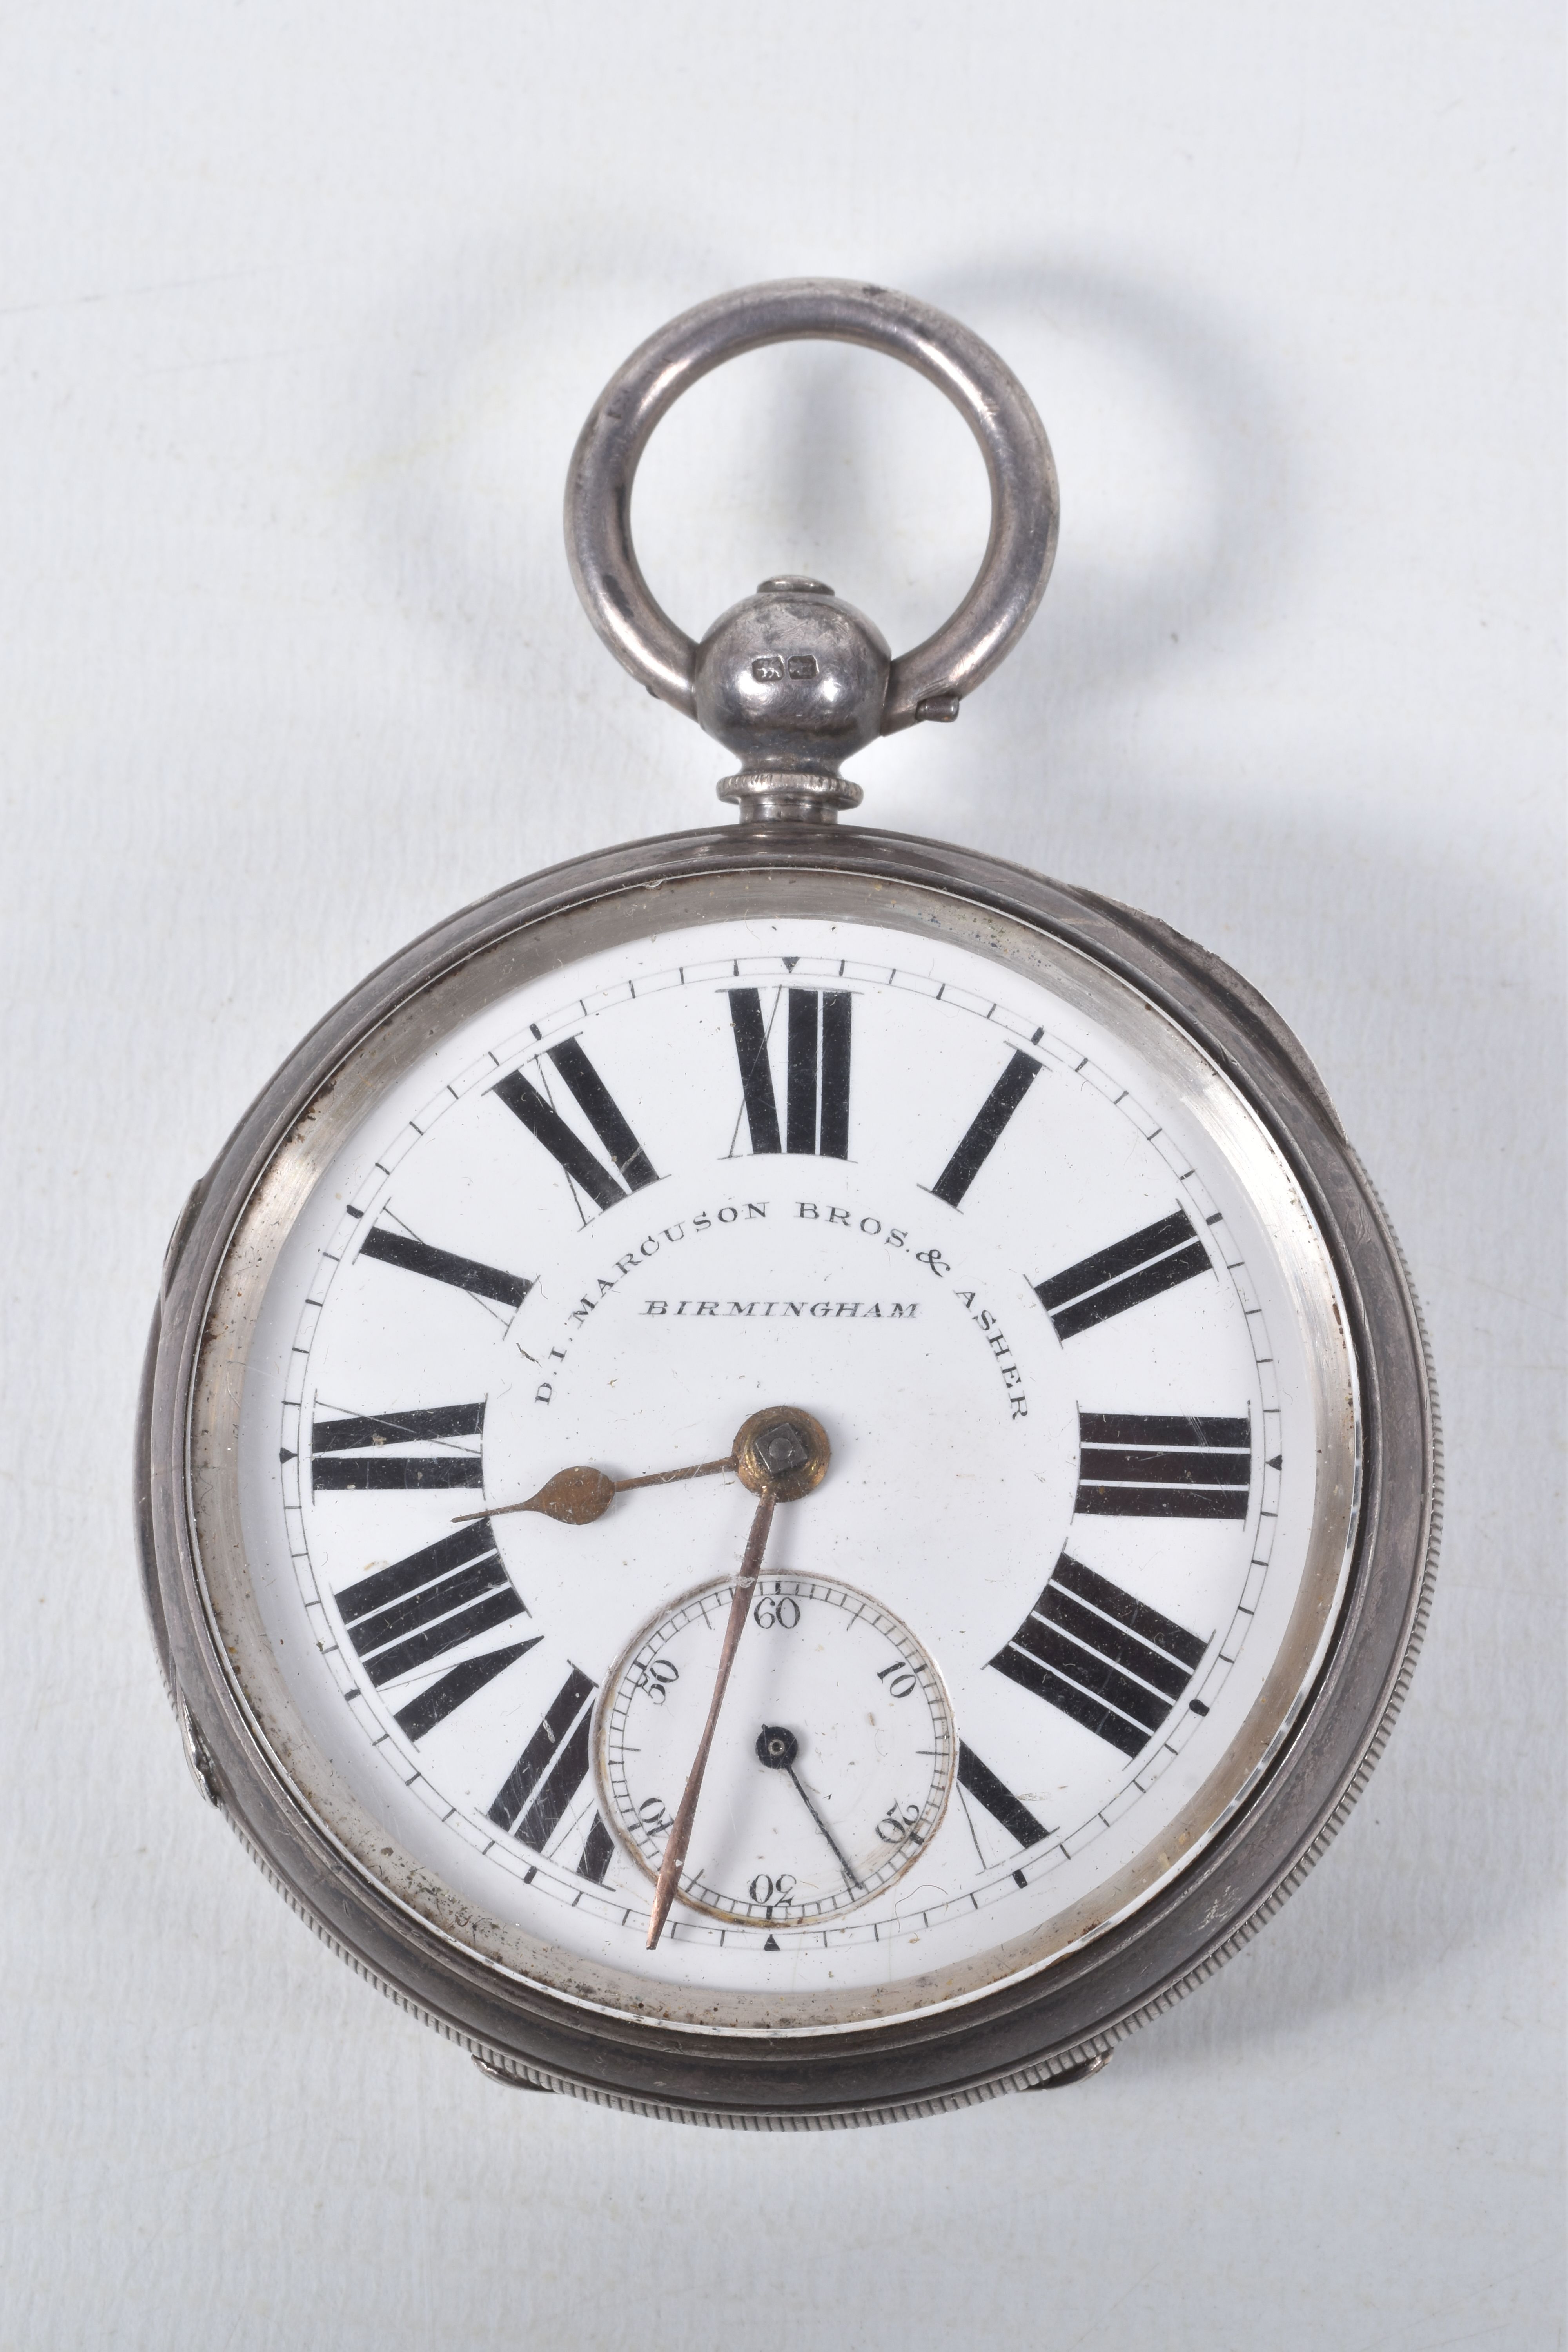 A LATE VICTORIAN SILVER OPEN FACE POCKET WATCH, key wound, round white dial signed 'D.I.MARCUSON